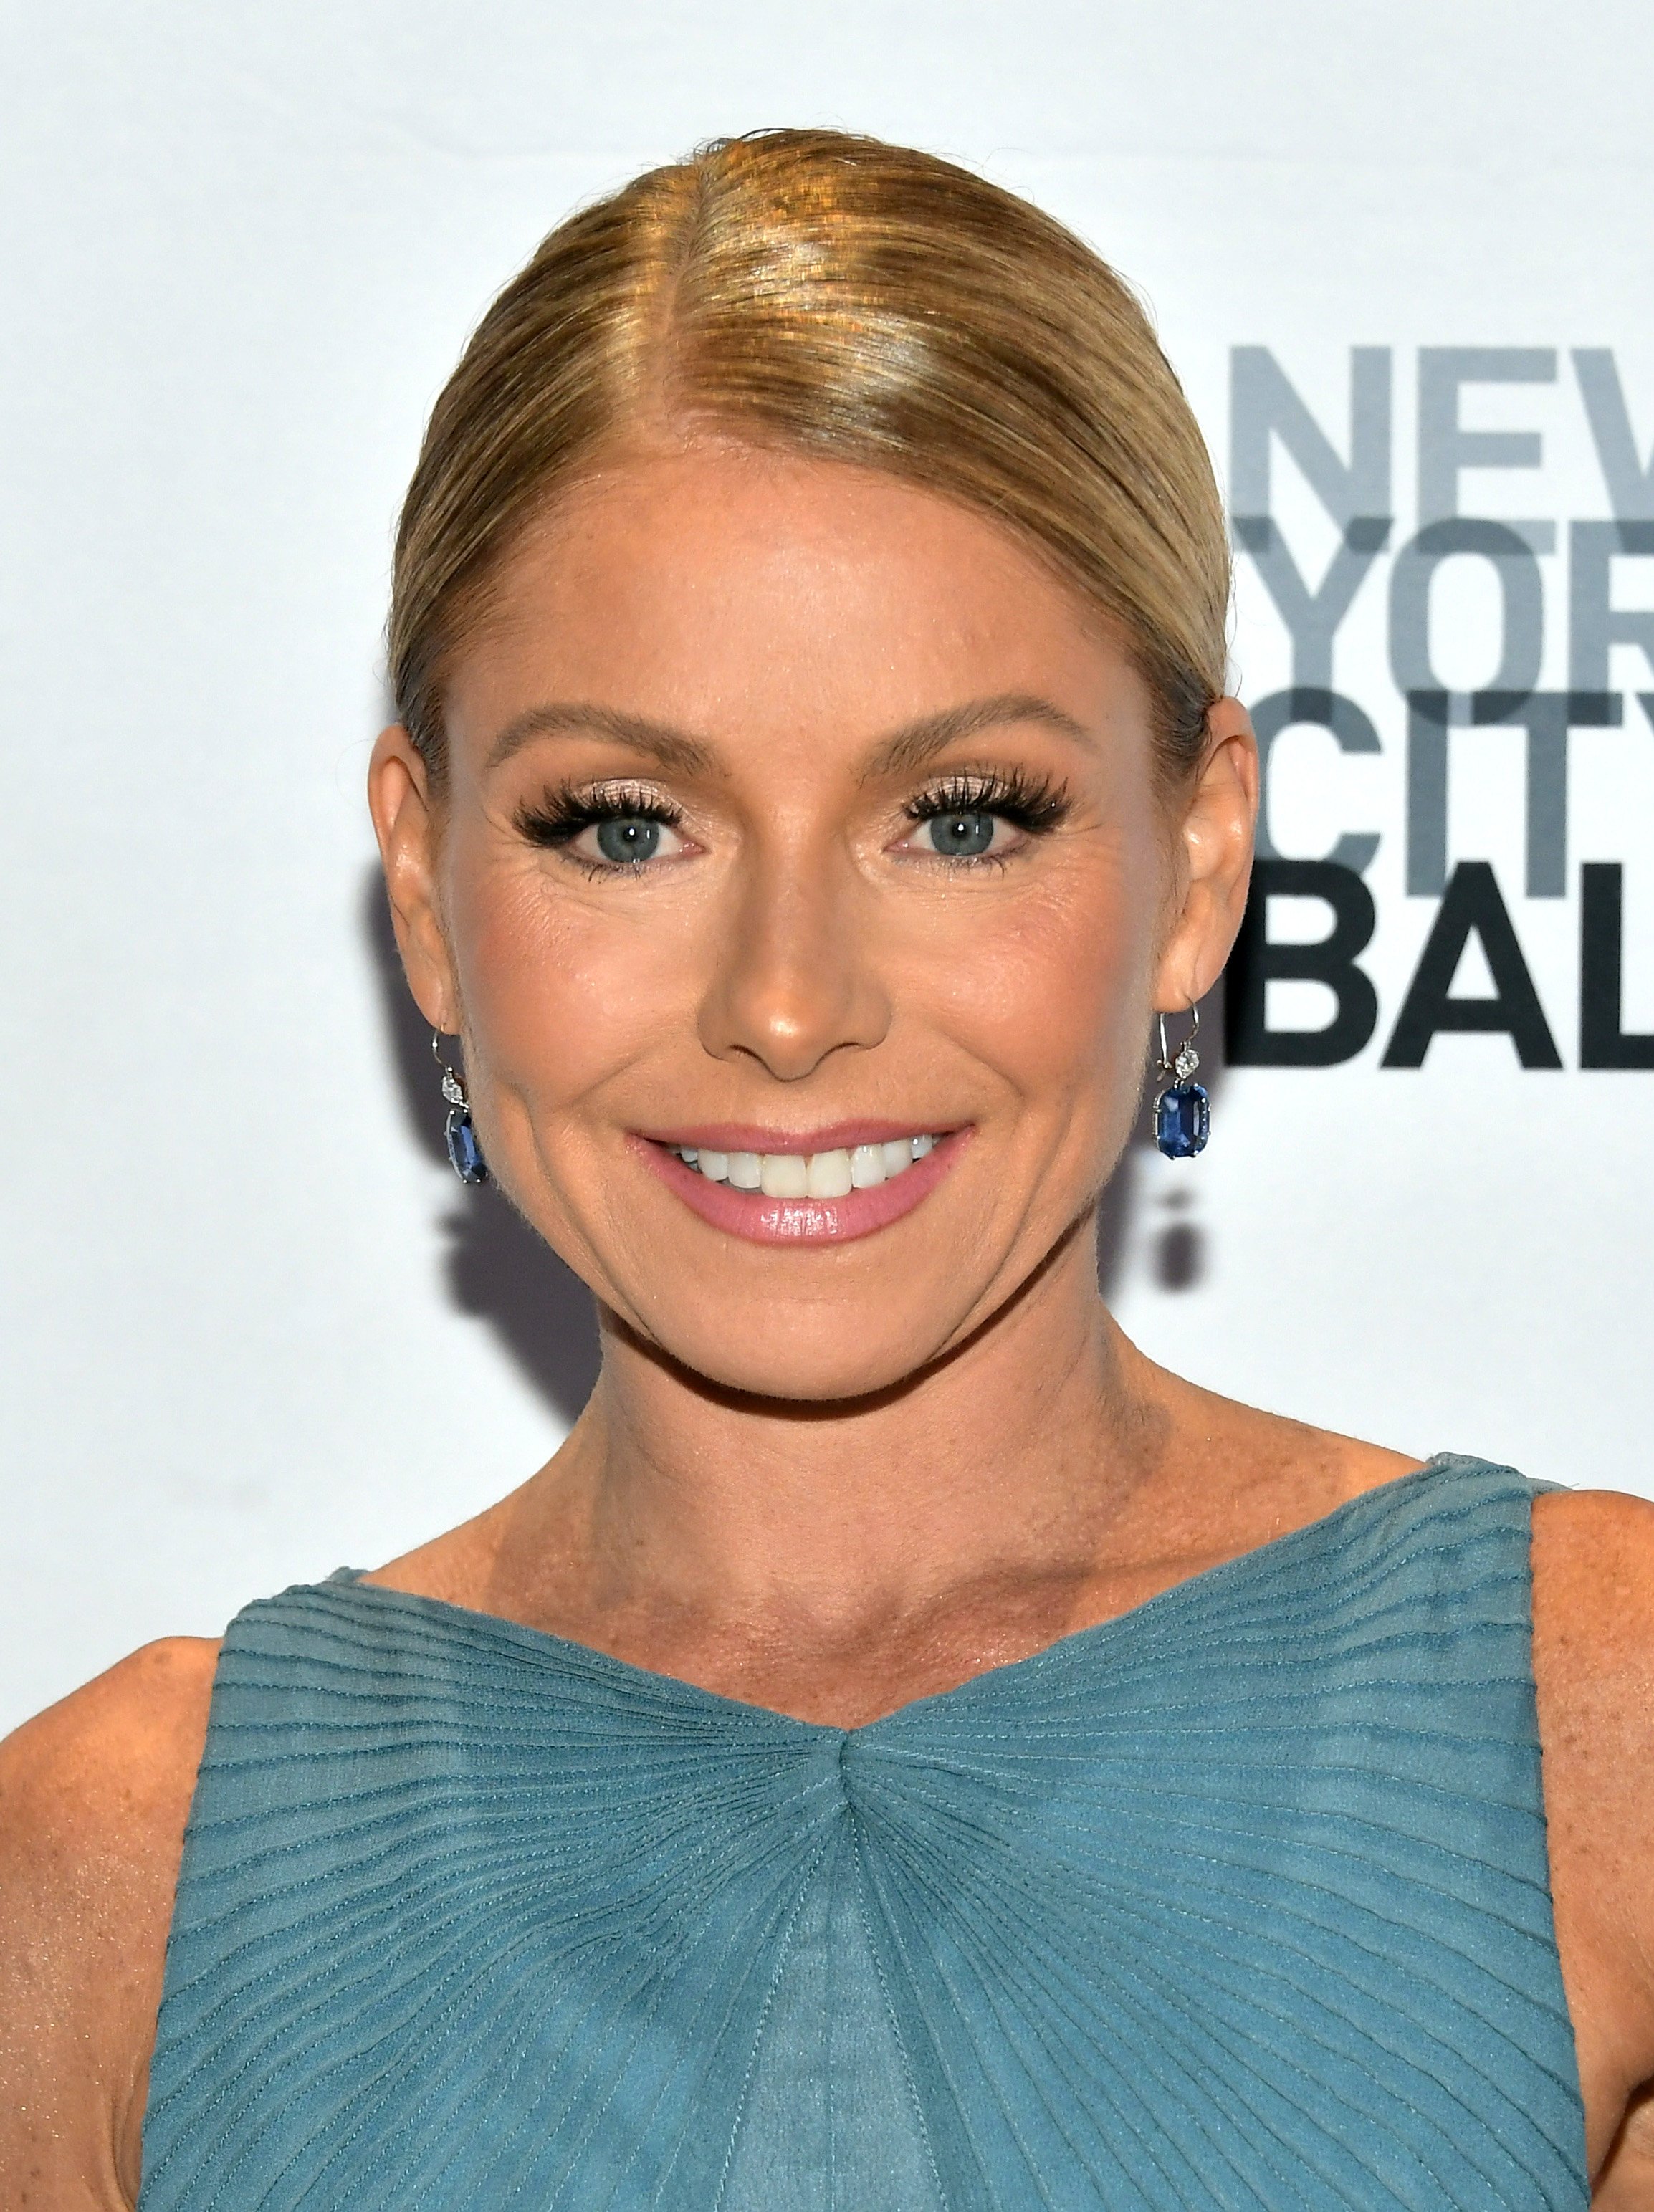 Kelly Ripa attends the 8th Annual New York City Ballet Fall Fashion Gala at David H. Koch Theater, Lincoln Center on September 26, 2019 in New York City. | Source: Getty Images